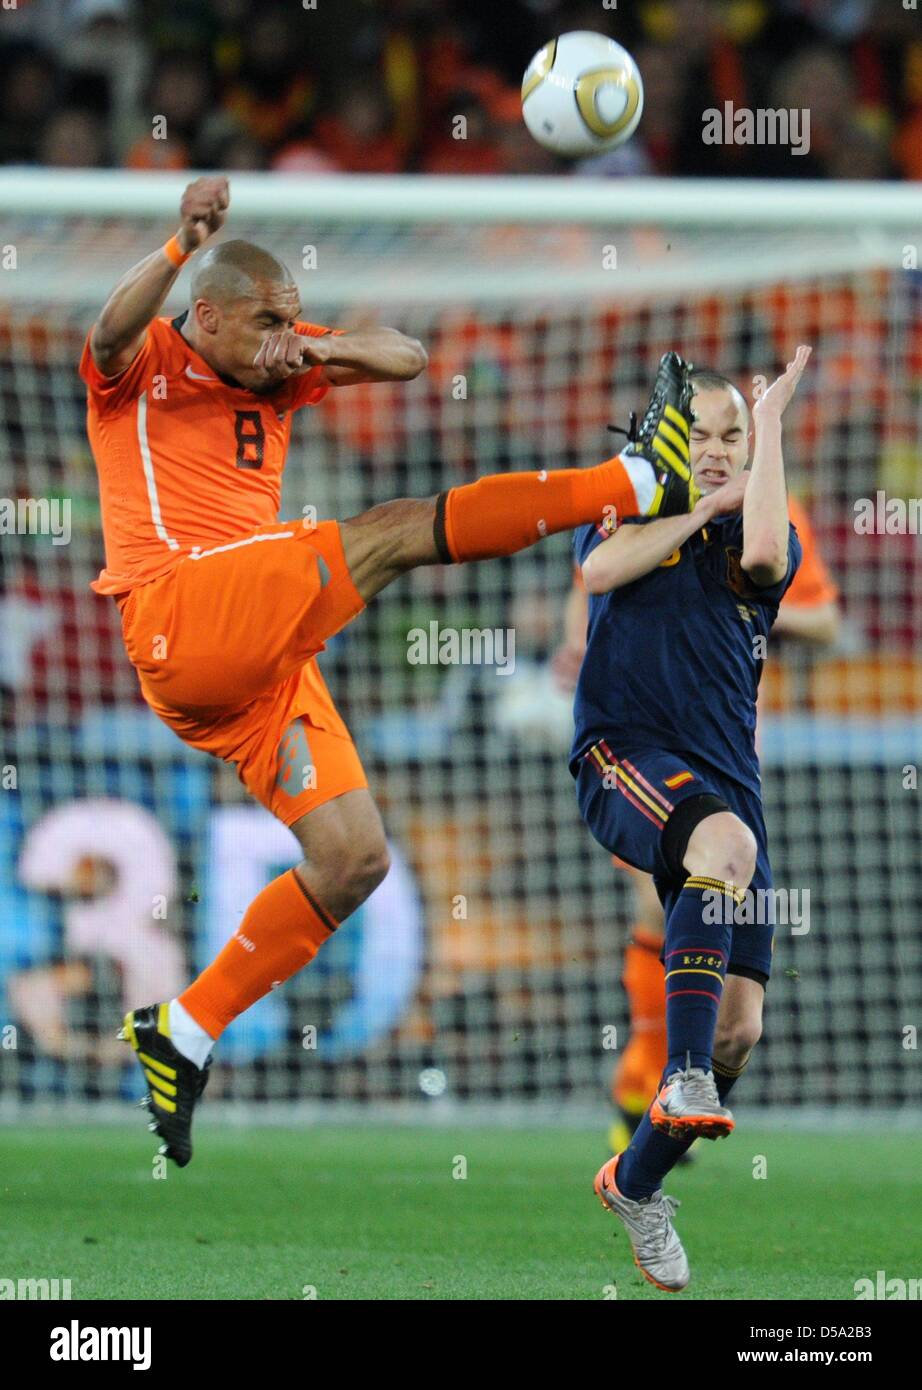 Nigel de Jong (L) of the Netherlands vies with Andres Iniesta (R) of Spain during the 2010 FIFA World Cup final match between the Netherlands and Spain at the Soccer City Stadium in Johannesburg, South Africa 11 July 2010. Photo: Bernd Weissbrod dpa - Please refer to http://dpaq.de/FIFA-WM2010-TC  +++(c) dpa - Bildfunk+++ Stock Photo